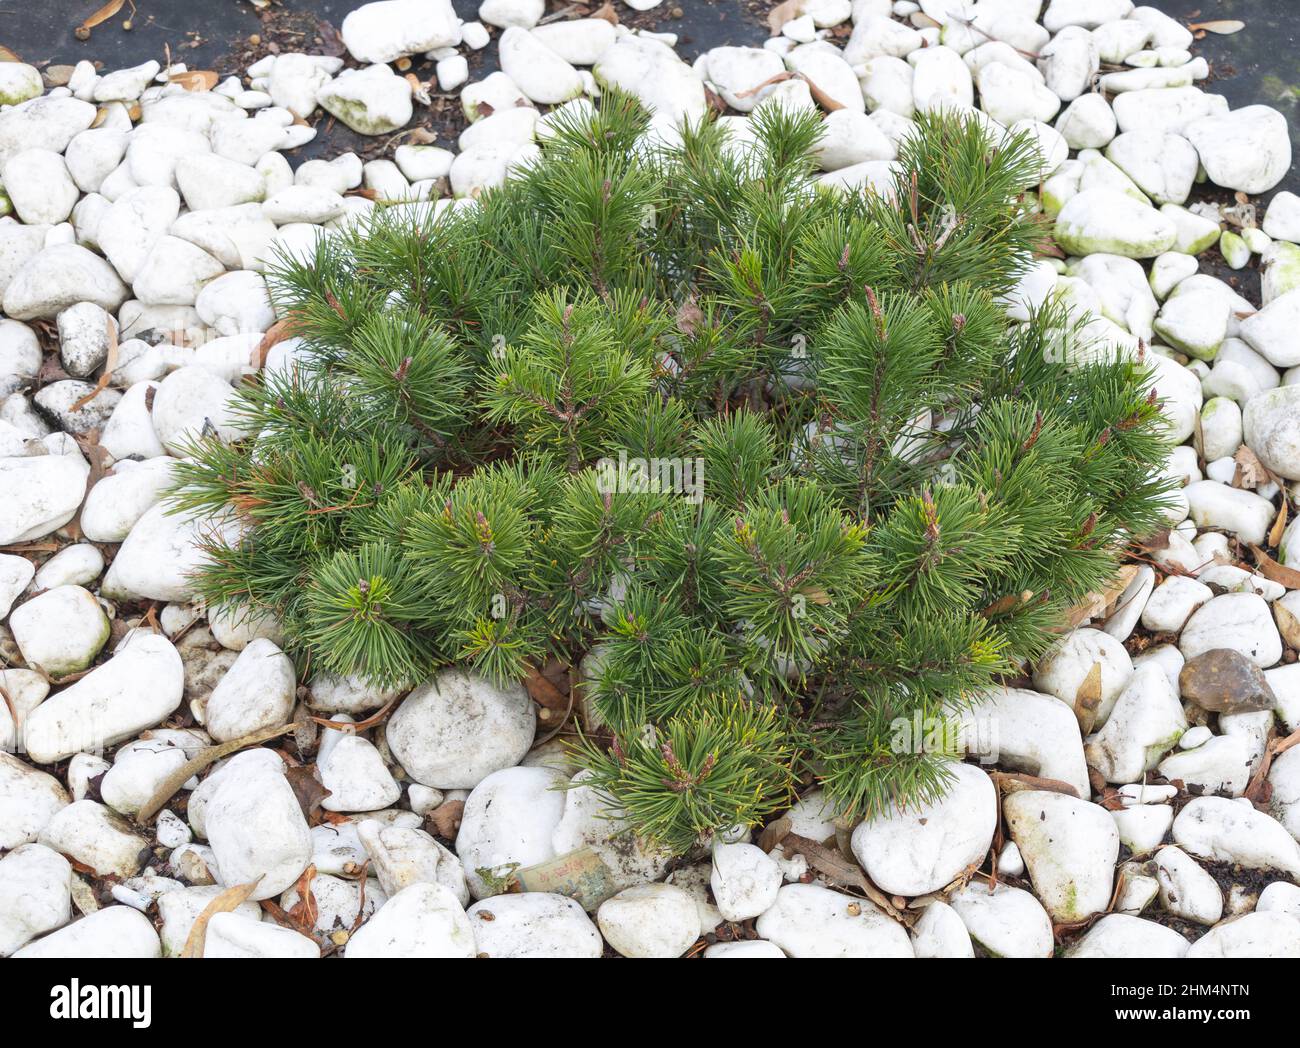 Some small pine trees planted and gravel around them as decoration. Stock Photo